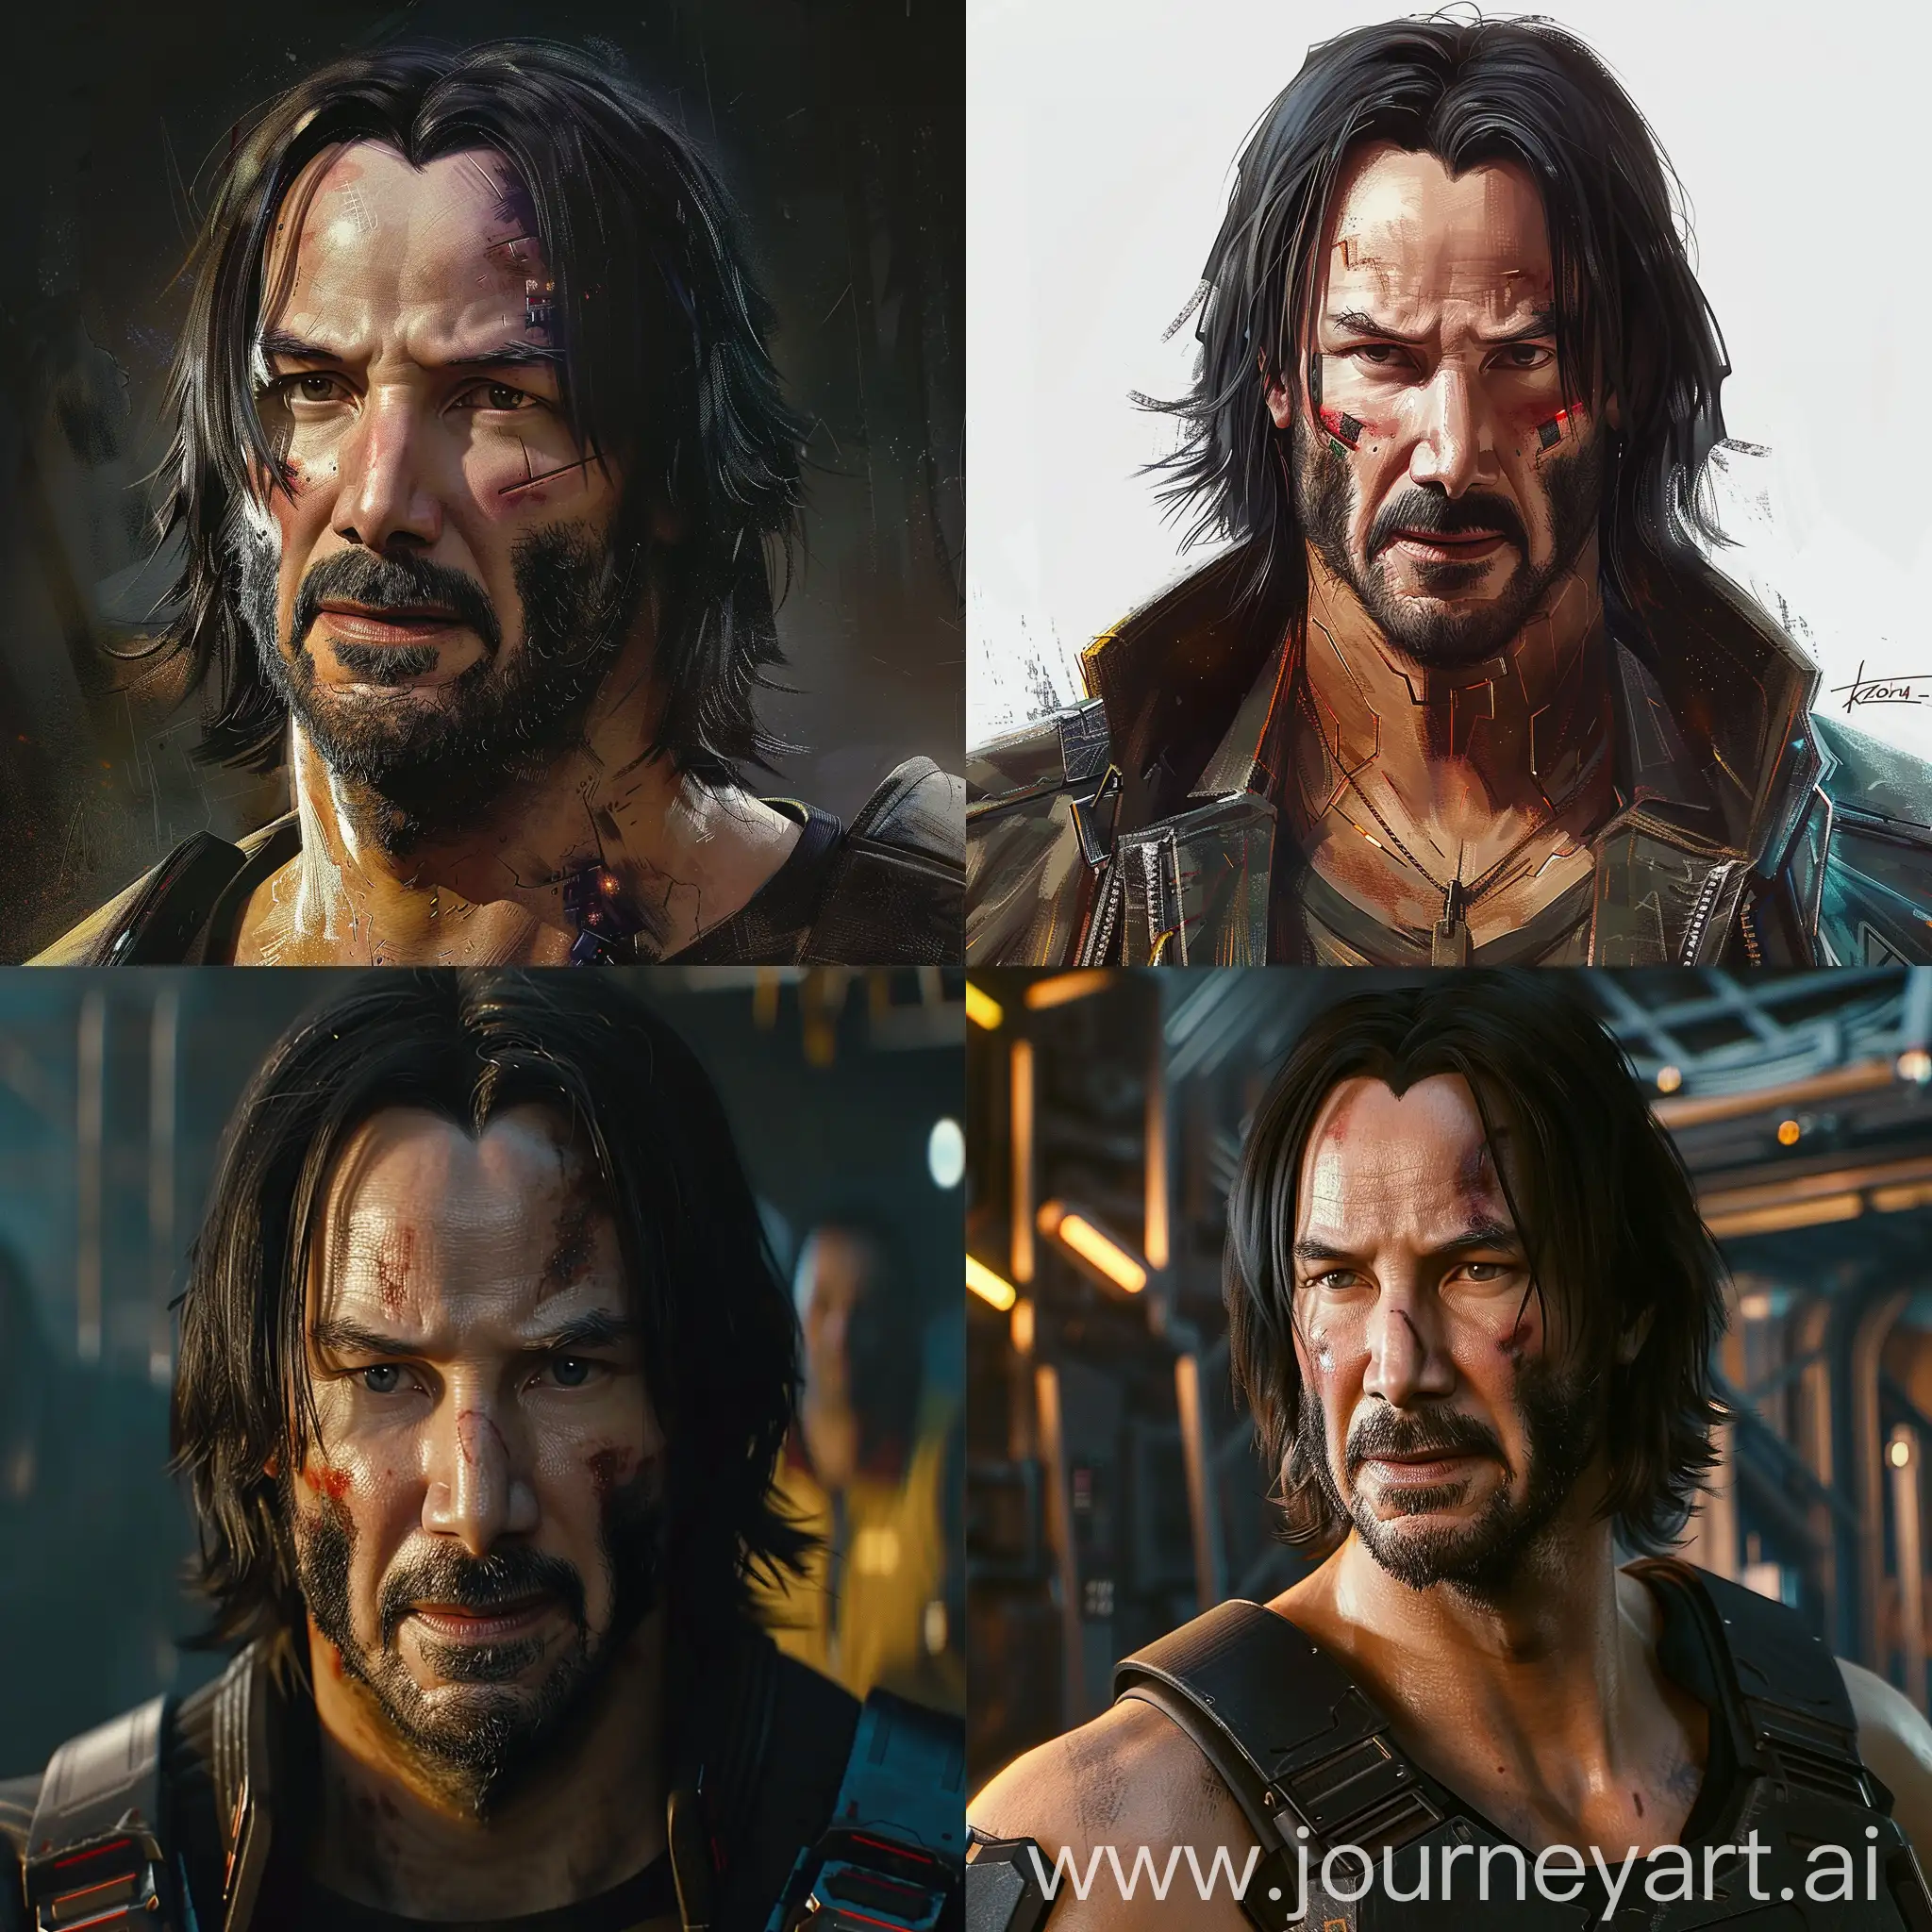 Keanu Reeves from the game Cyberpunk 2077 